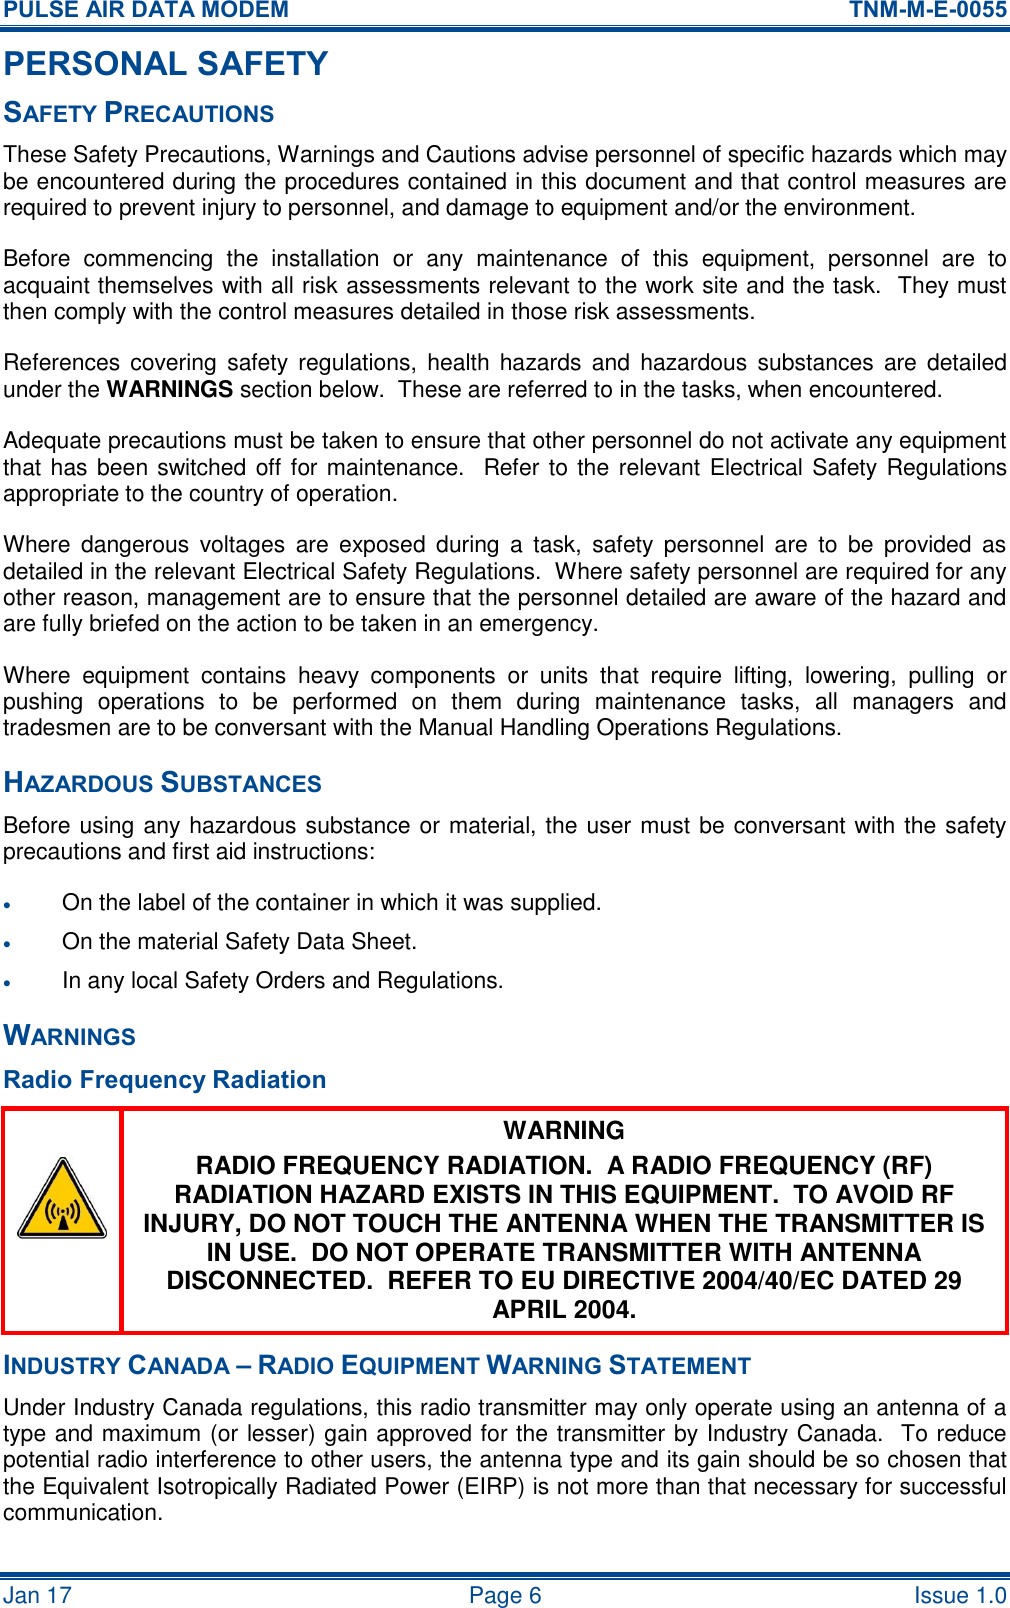 PULSE AIR DATA MODEM  TNM-M-E-0055 Jan 17   Page 6  Issue 1.0 PERSONAL SAFETY SAFETY PRECAUTIONS These Safety Precautions, Warnings and Cautions advise personnel of specific hazards which may be encountered during the procedures contained in this document and that control measures are required to prevent injury to personnel, and damage to equipment and/or the environment. Before  commencing  the  installation  or  any  maintenance  of  this  equipment,  personnel  are  to acquaint themselves with all risk assessments relevant to the work site and the task.  They must then comply with the control measures detailed in those risk assessments. References covering  safety  regulations,  health  hazards and hazardous  substances are detailed under the WARNINGS section below.  These are referred to in the tasks, when encountered. Adequate precautions must be taken to ensure that other personnel do not activate any equipment that has been switched off for maintenance.  Refer to the  relevant Electrical Safety Regulations appropriate to the country of operation. Where  dangerous  voltages  are  exposed  during  a  task,  safety  personnel  are  to  be  provided  as detailed in the relevant Electrical Safety Regulations.  Where safety personnel are required for any other reason, management are to ensure that the personnel detailed are aware of the hazard and are fully briefed on the action to be taken in an emergency. Where  equipment  contains  heavy  components  or  units  that  require  lifting,  lowering,  pulling  or pushing  operations  to  be  performed  on  them  during  maintenance  tasks,  all  managers  and tradesmen are to be conversant with the Manual Handling Operations Regulations. HAZARDOUS SUBSTANCES Before using any hazardous substance or material, the user must be conversant with the safety precautions and first aid instructions:  On the label of the container in which it was supplied.  On the material Safety Data Sheet.  In any local Safety Orders and Regulations. WARNINGS Radio Frequency Radiation  WARNING RADIO FREQUENCY RADIATION.  A RADIO FREQUENCY (RF) RADIATION HAZARD EXISTS IN THIS EQUIPMENT.  TO AVOID RF INJURY, DO NOT TOUCH THE ANTENNA WHEN THE TRANSMITTER IS IN USE.  DO NOT OPERATE TRANSMITTER WITH ANTENNA DISCONNECTED.  REFER TO EU DIRECTIVE 2004/40/EC DATED 29 APRIL 2004. INDUSTRY CANADA – RADIO EQUIPMENT WARNING STATEMENT Under Industry Canada regulations, this radio transmitter may only operate using an antenna of a type and maximum (or lesser) gain approved for the transmitter by Industry Canada.  To reduce potential radio interference to other users, the antenna type and its gain should be so chosen that the Equivalent Isotropically Radiated Power (EIRP) is not more than that necessary for successful communication. 